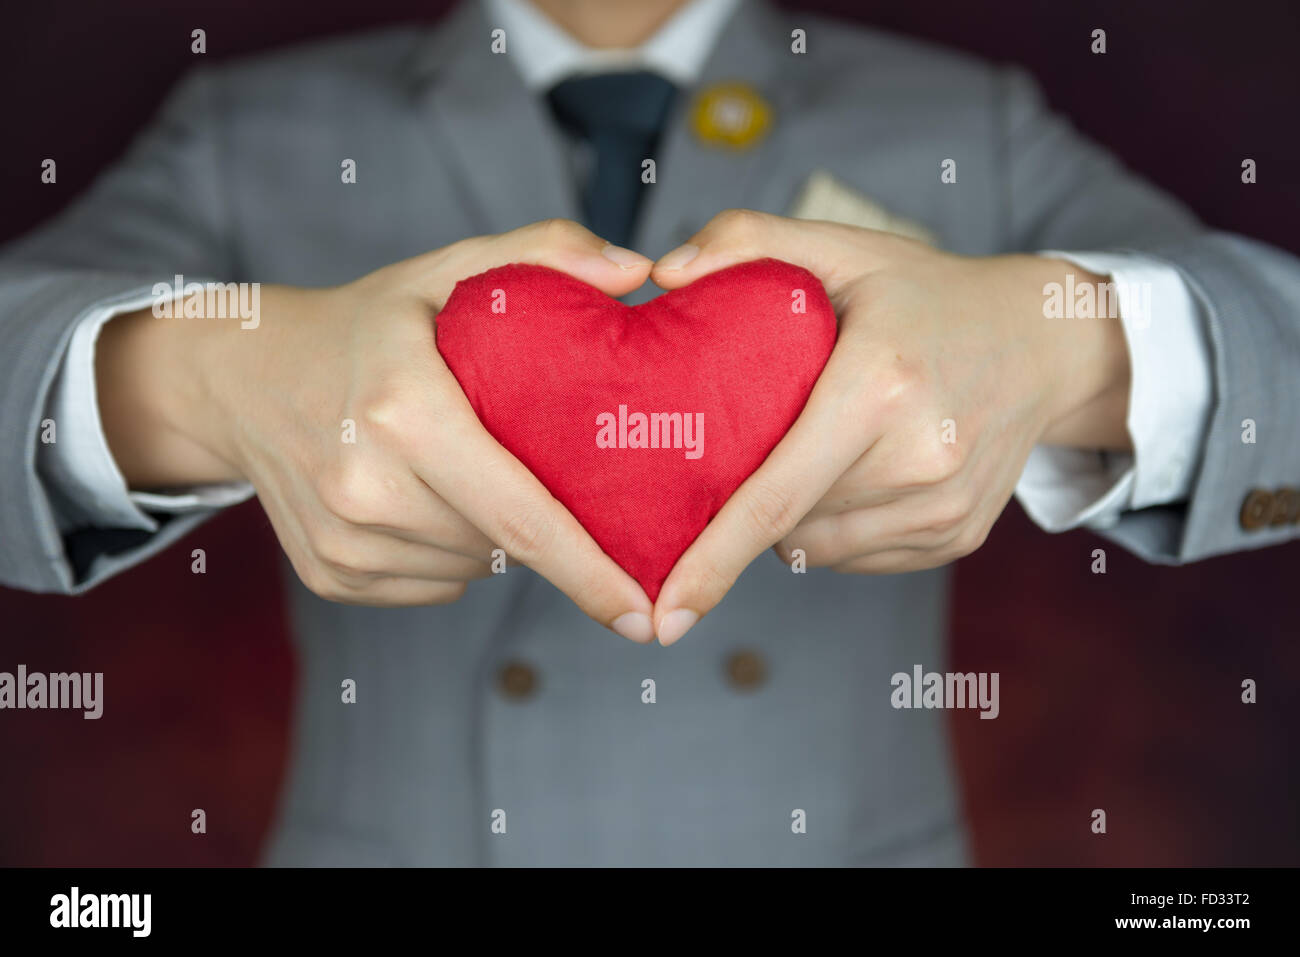 red heart in hands with heart gesture, valentine's concept, man in grey suit Stock Photo